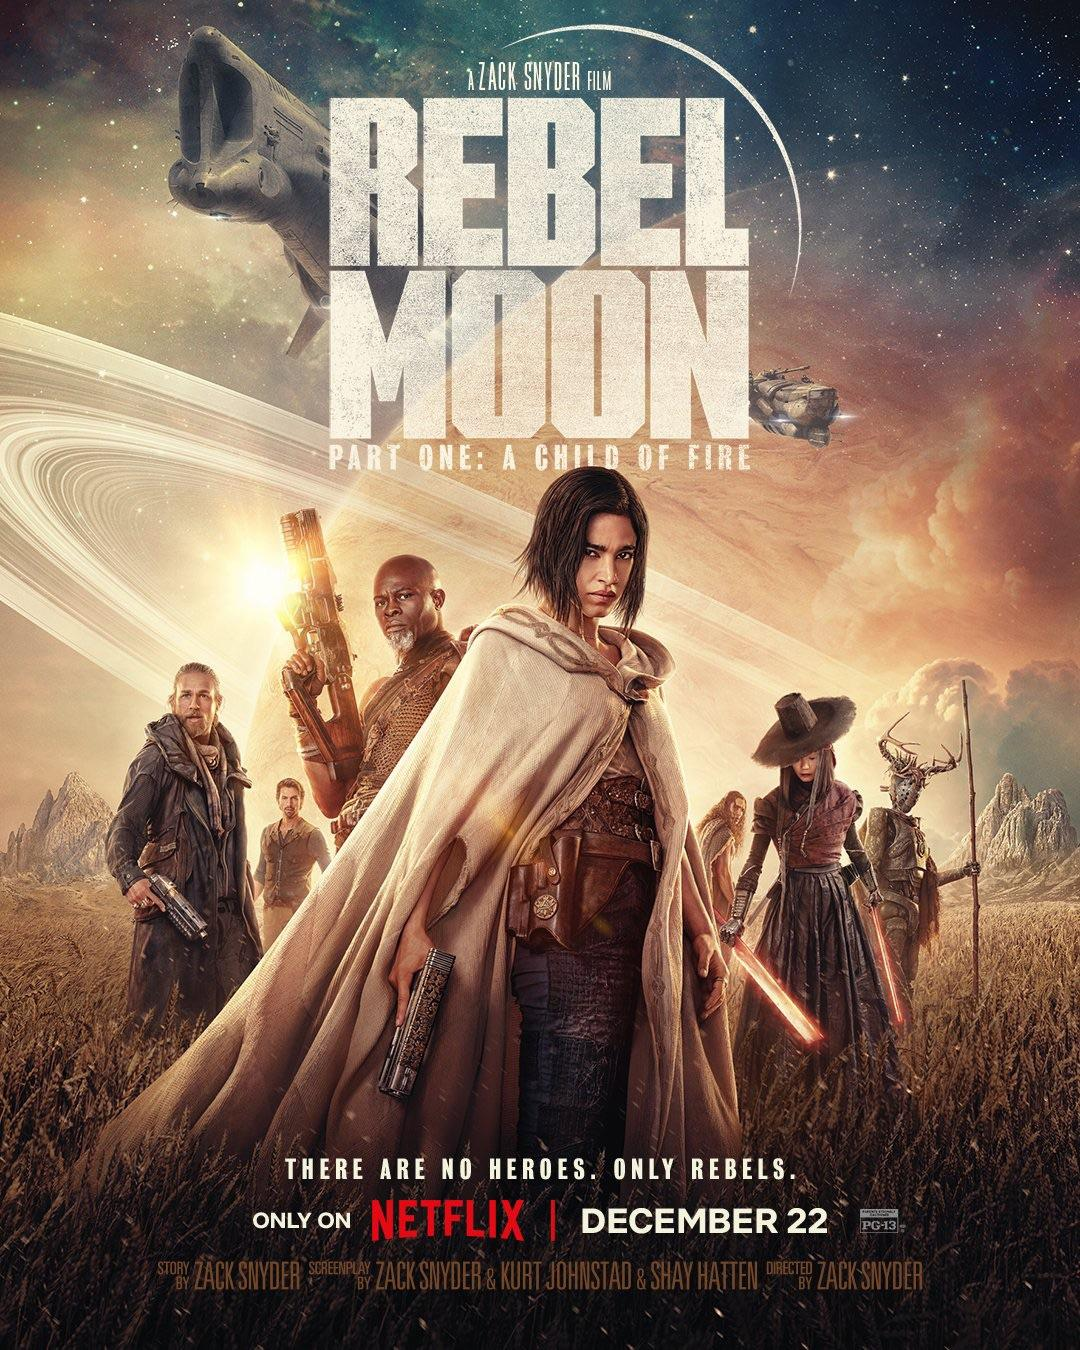 A poster for Zack Snyder's movie called "Rebel Moon. Part 1: A Child of Fire"